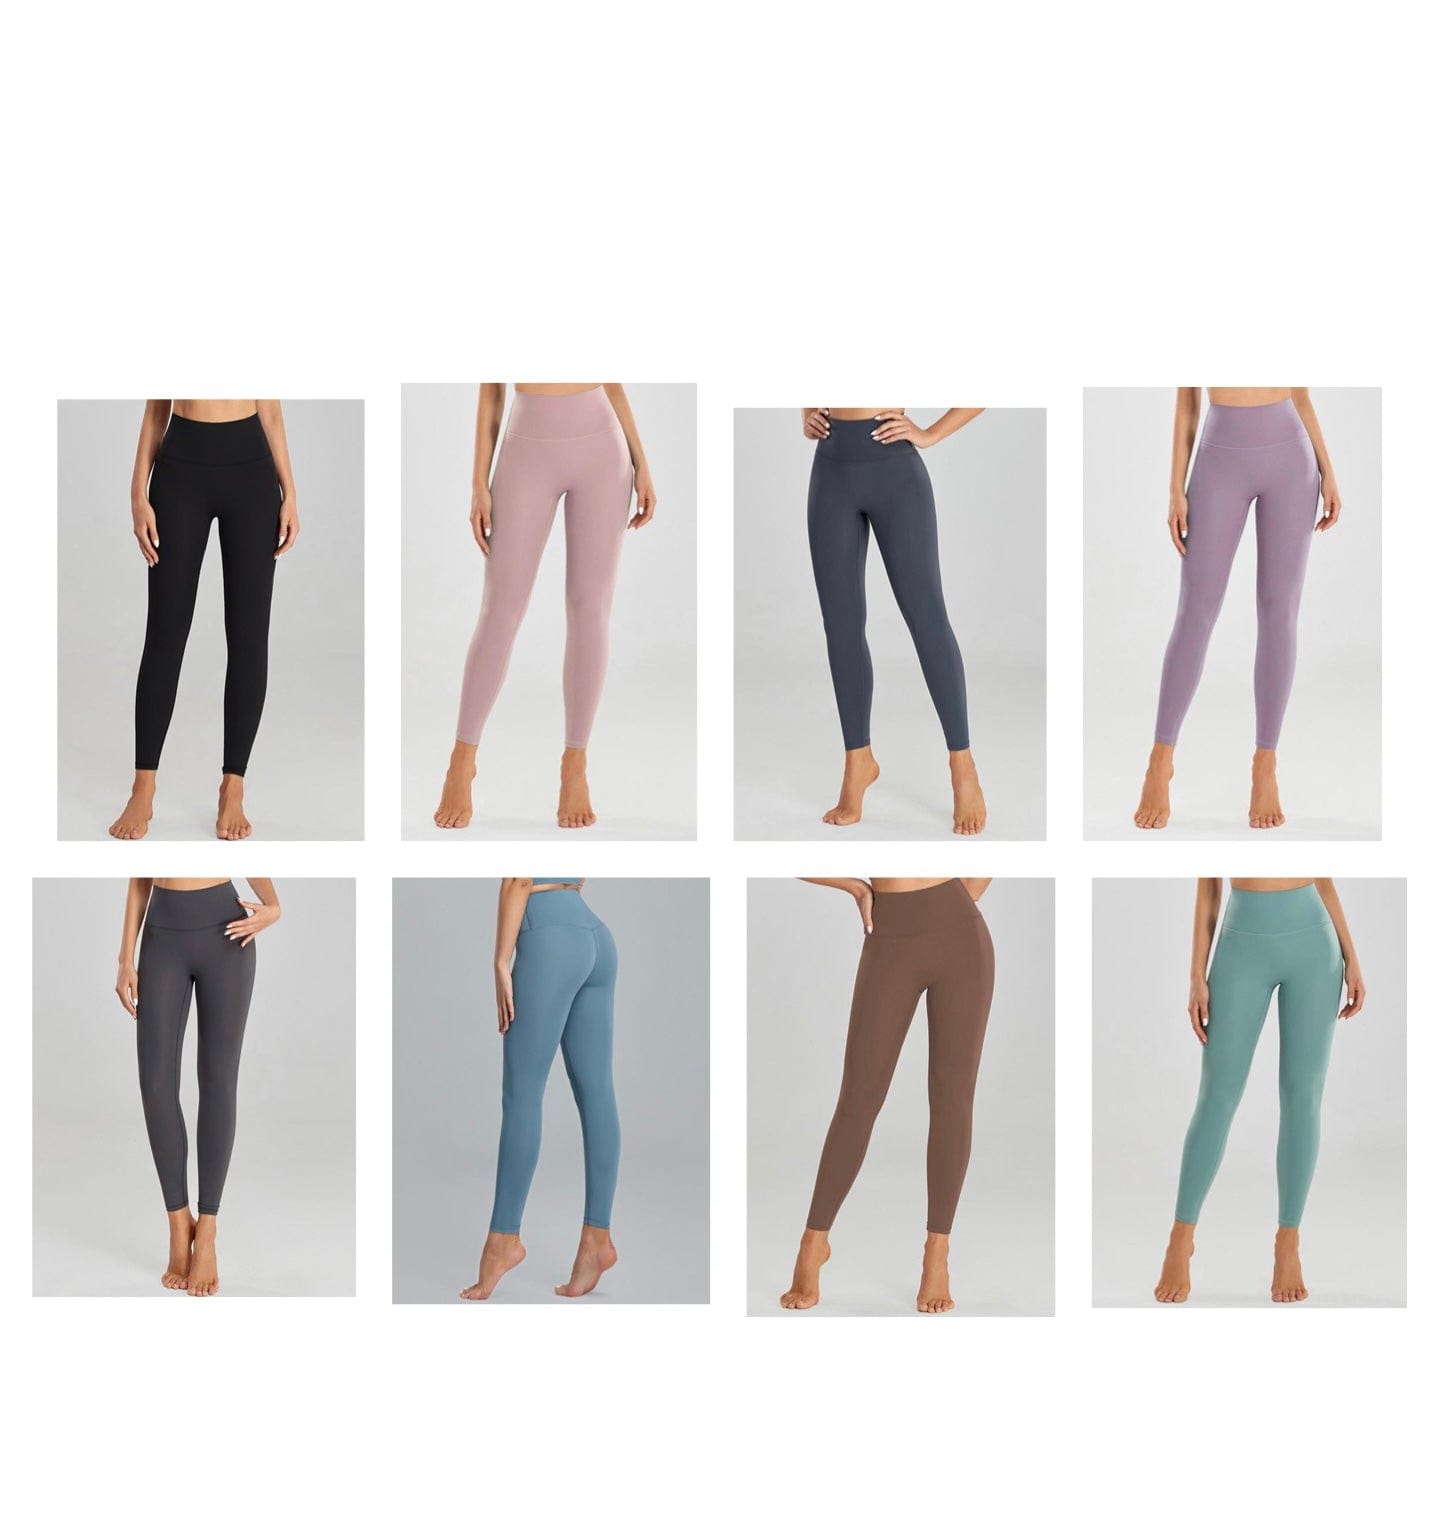 Mossimo Supply Co Leggings - $9 - From Jacey